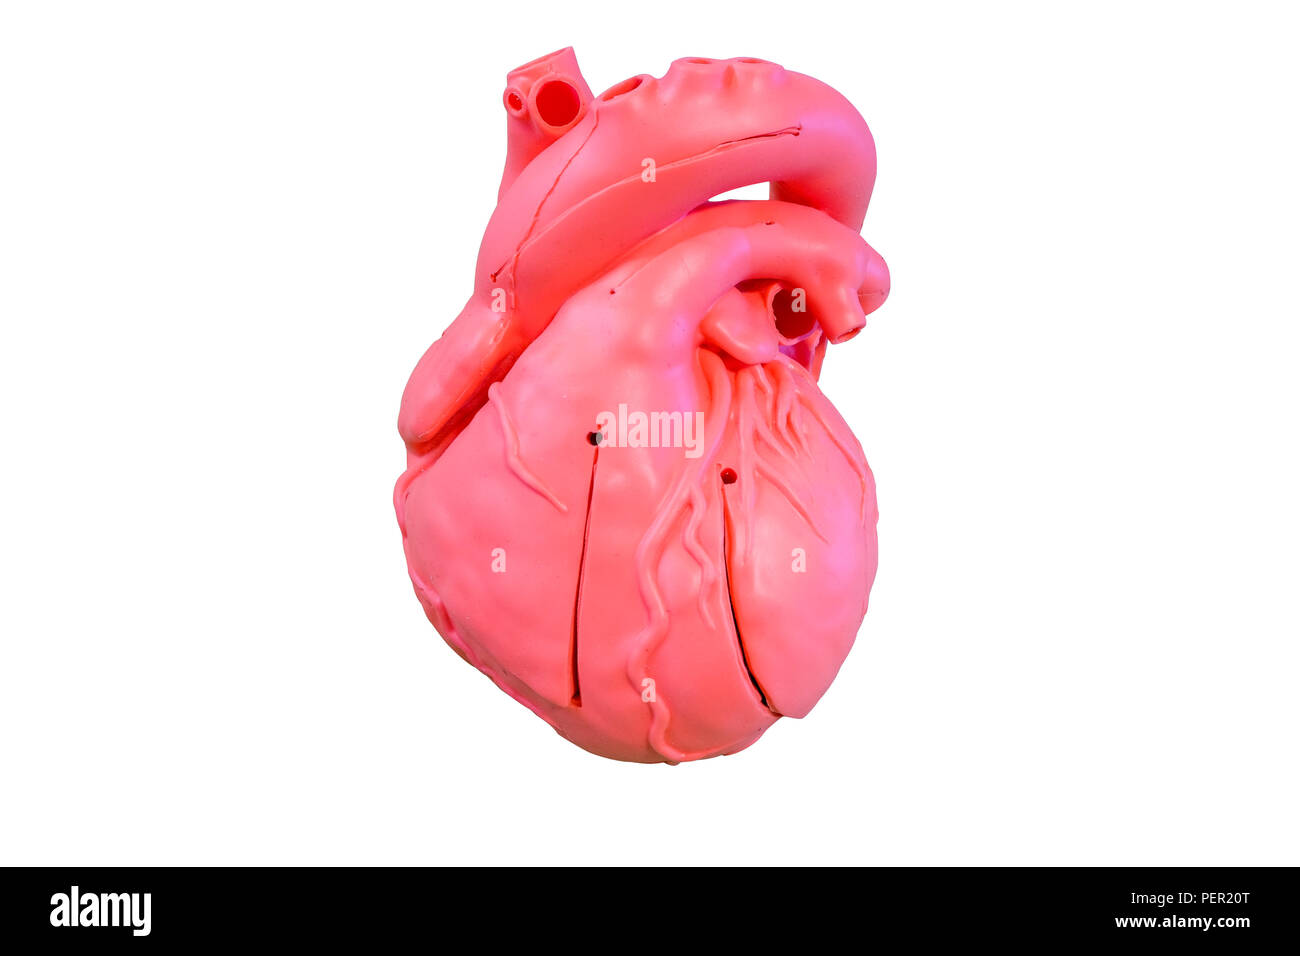 Anatomy model silicone type of the cardiovascular system for use in medical education, isolated on white background Stock Photo